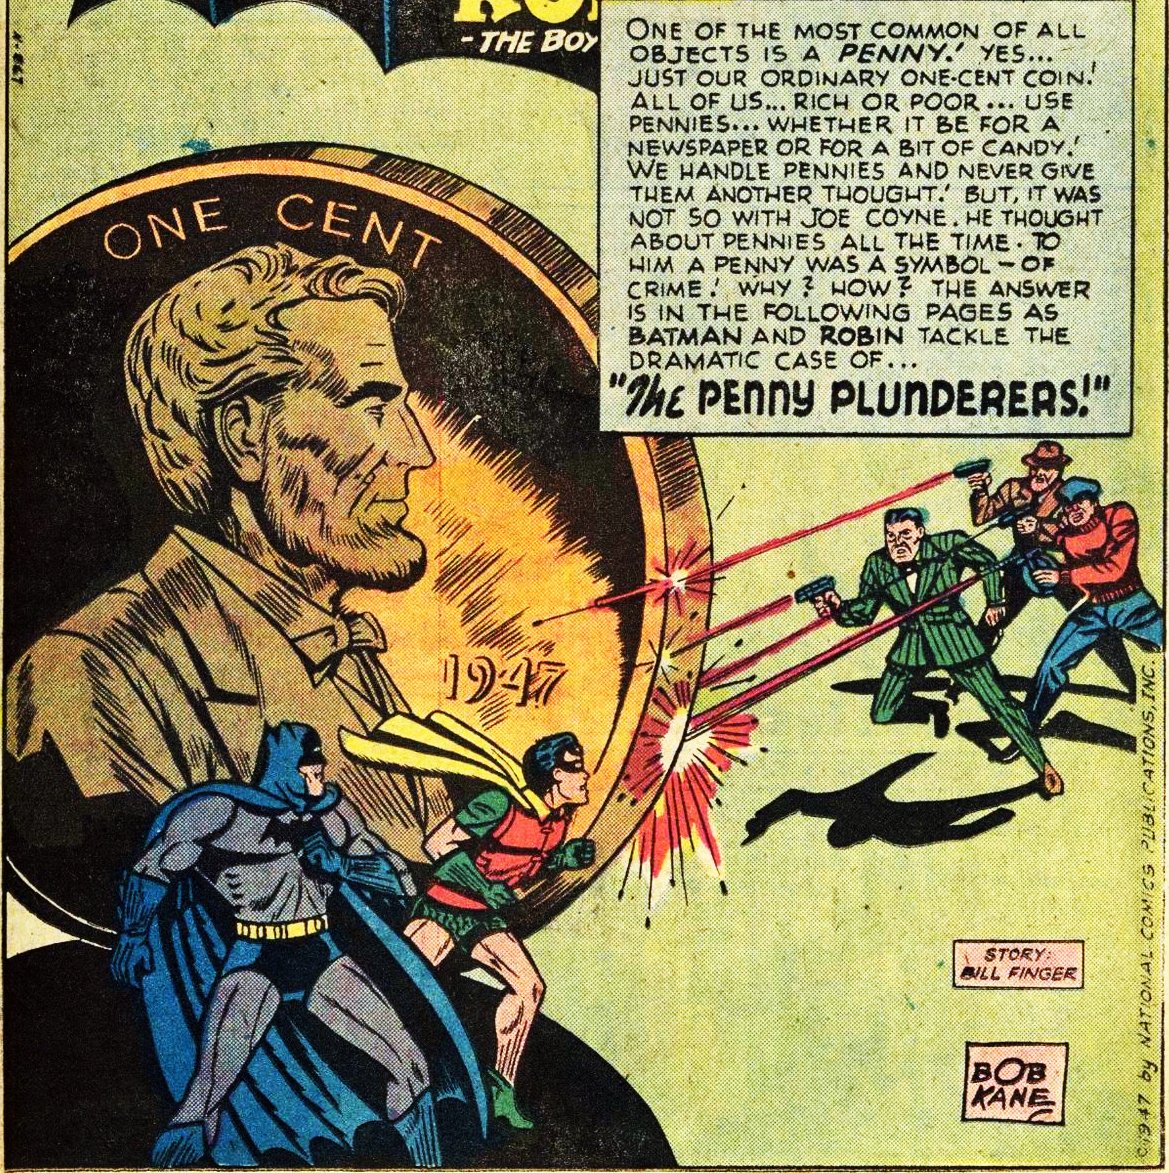 Finger is also responsible for Batman's characteristic "oversized aesthetic" e.g. the famous giant Lincoln penny.